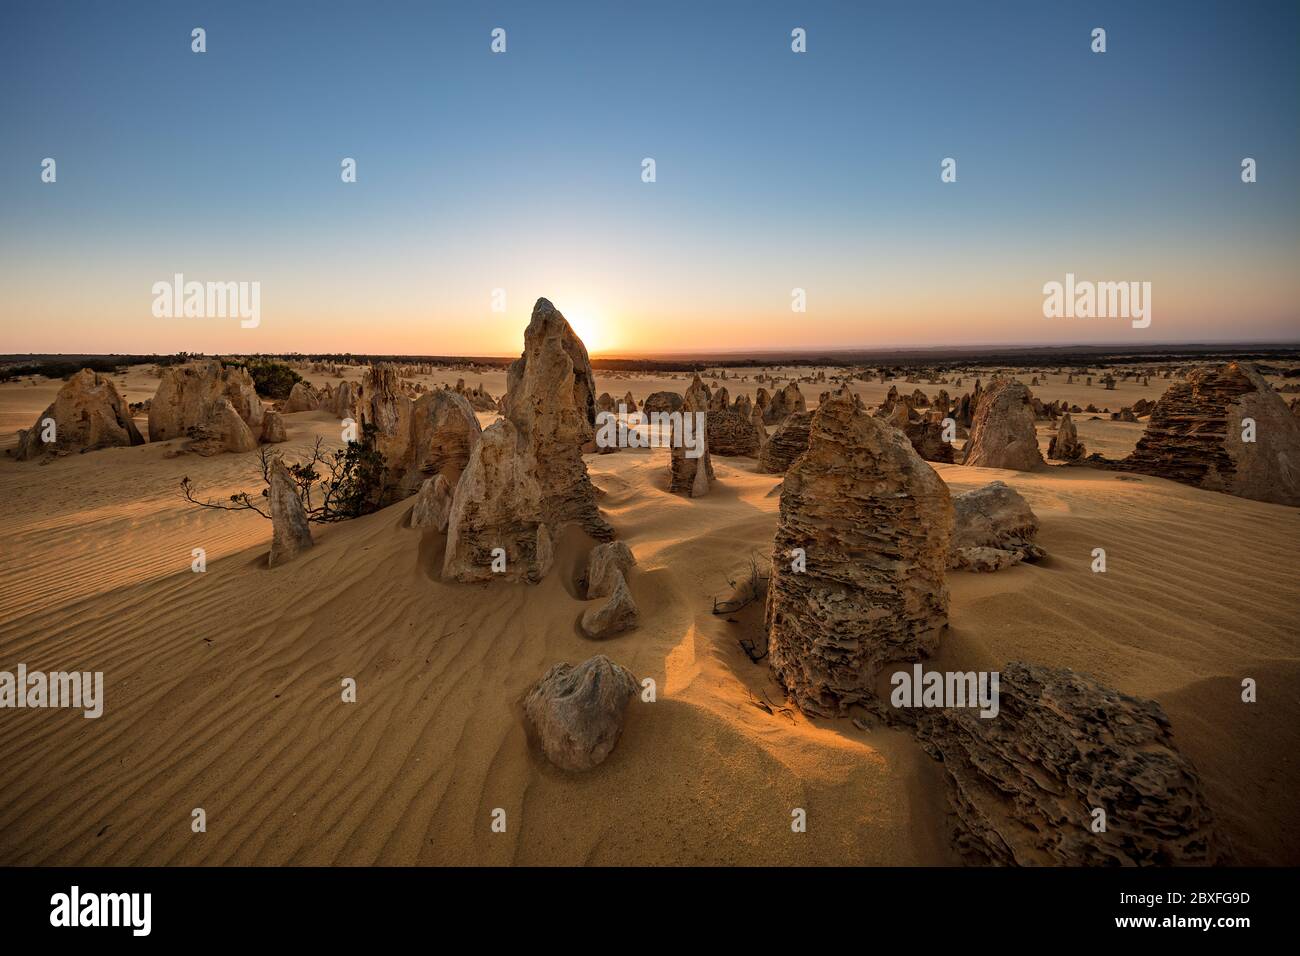 Sun setting behind the limestone stacks in the Pinnacles desert in the Nambung national park located north of Perth in Western Australia Stock Photo